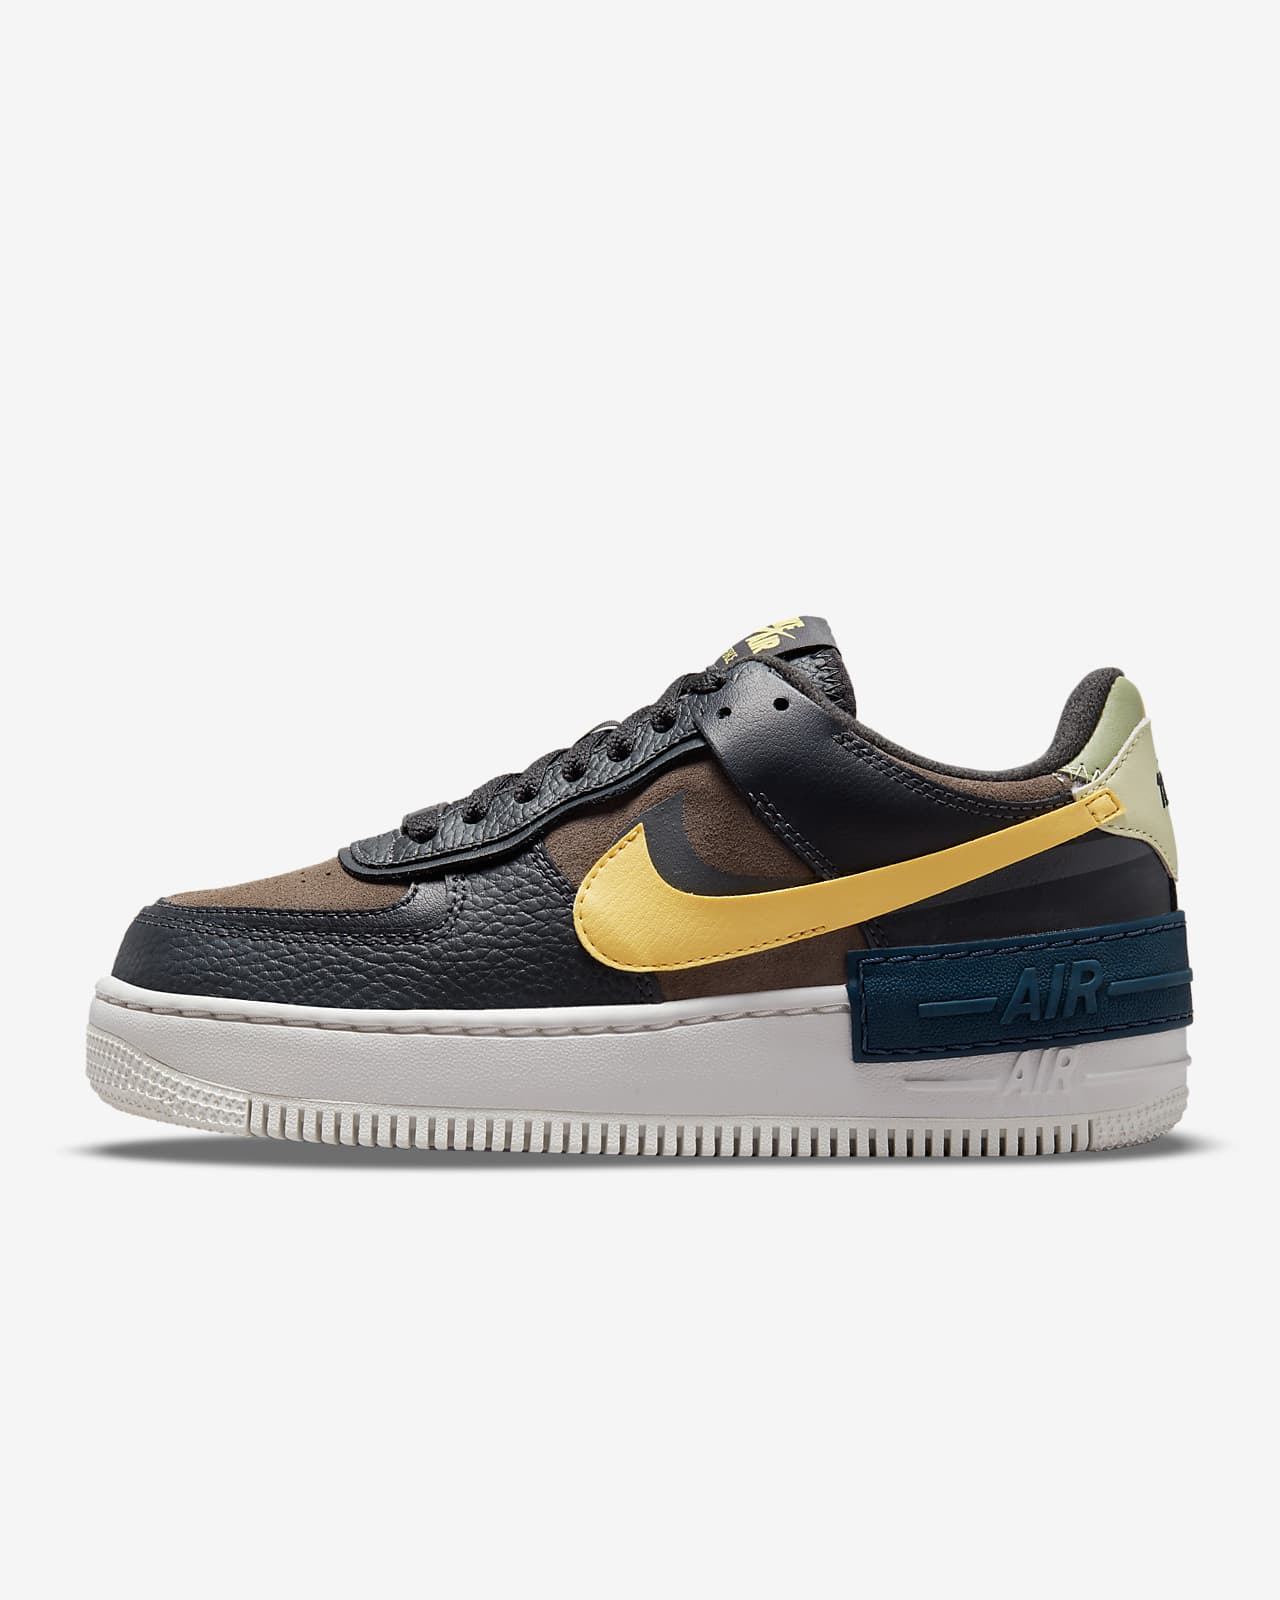 Chaussure Nike Air Force 1 Shadow pour Femme